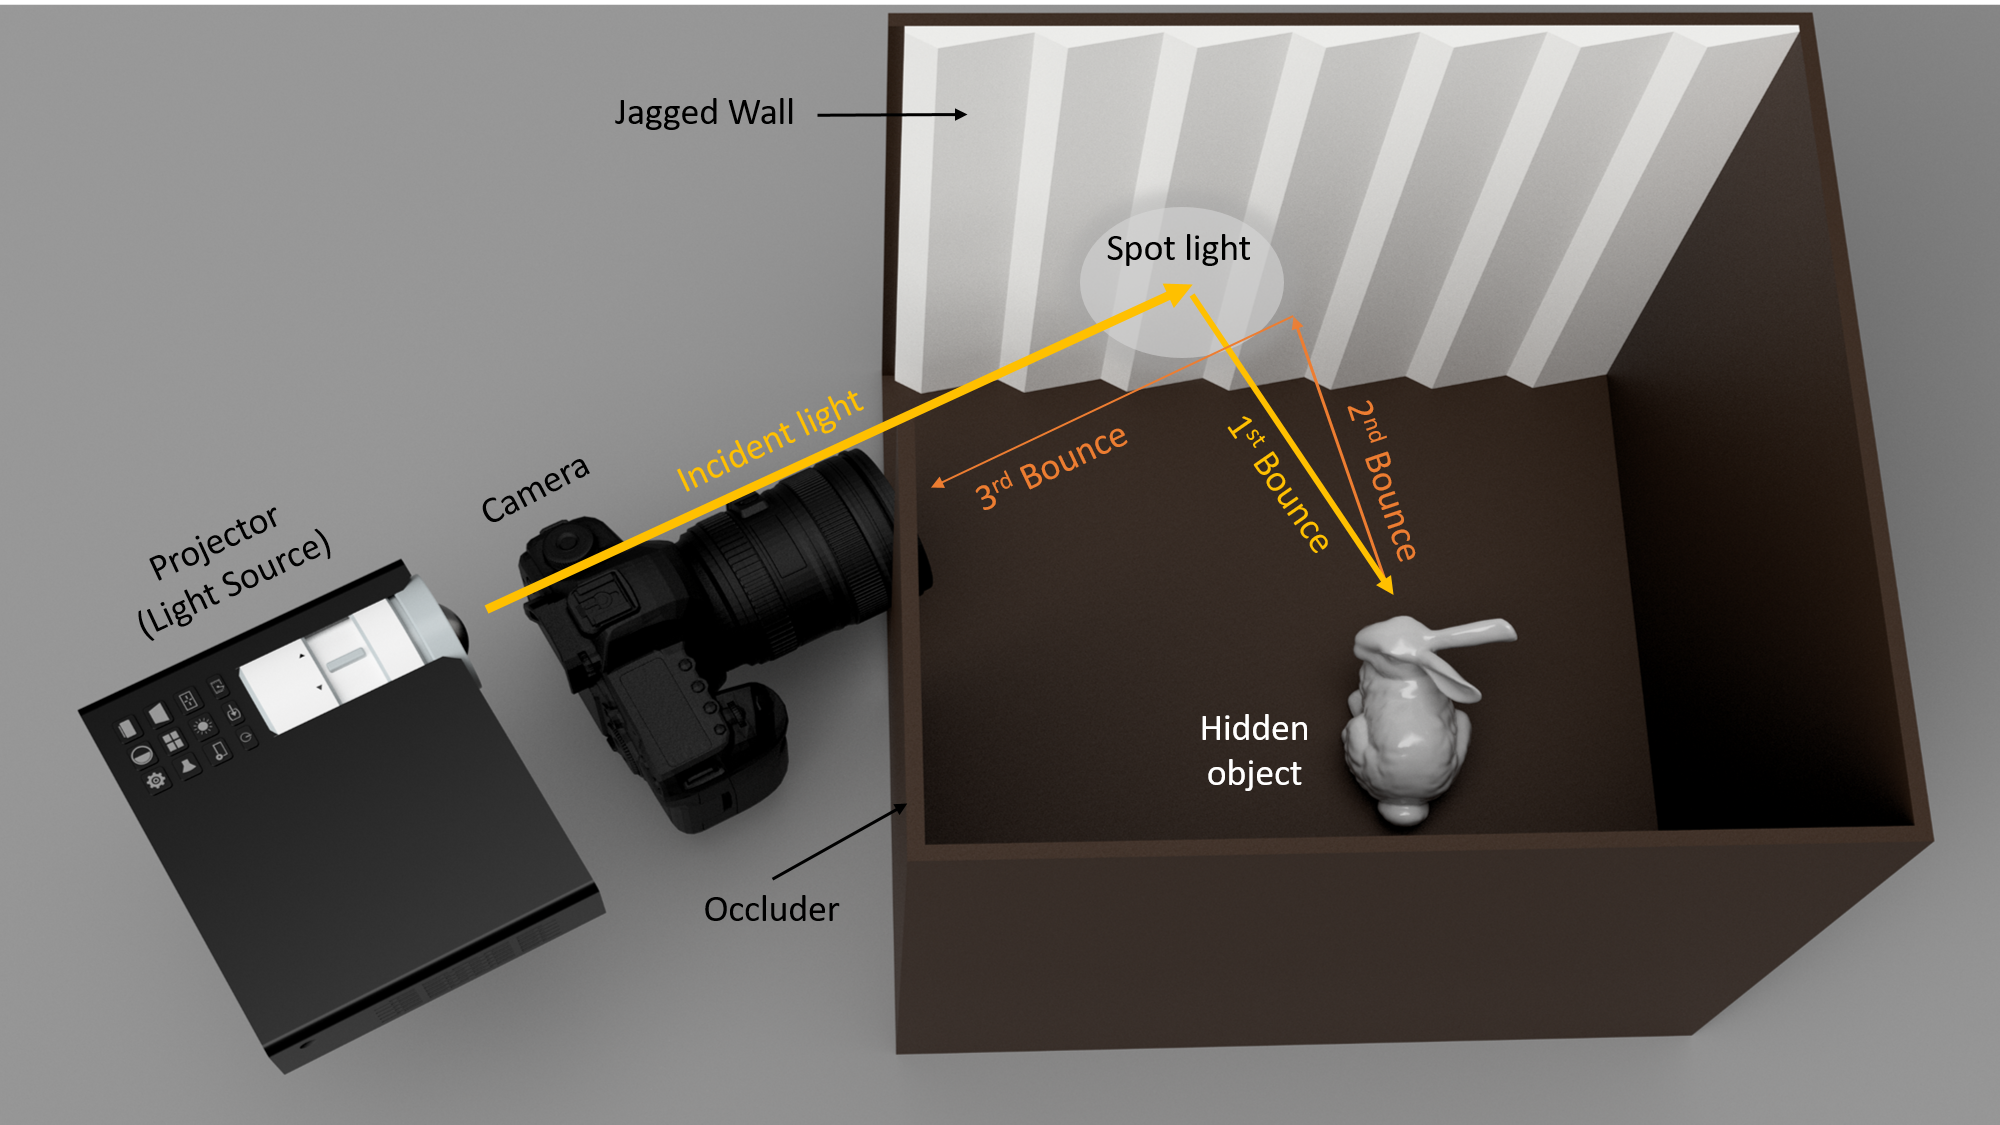 Our NLOS imaging scenario consists of a projector illuminating a spot on a LOS scene (not necessarily planar), and a camera captures an image of this spot. An illuminated spot on the wall undergoes at least three diffuse reflections or bounces as it travels from a point on the wall to hidden NLOS object and back to the wall, before being captured by the focused camera.